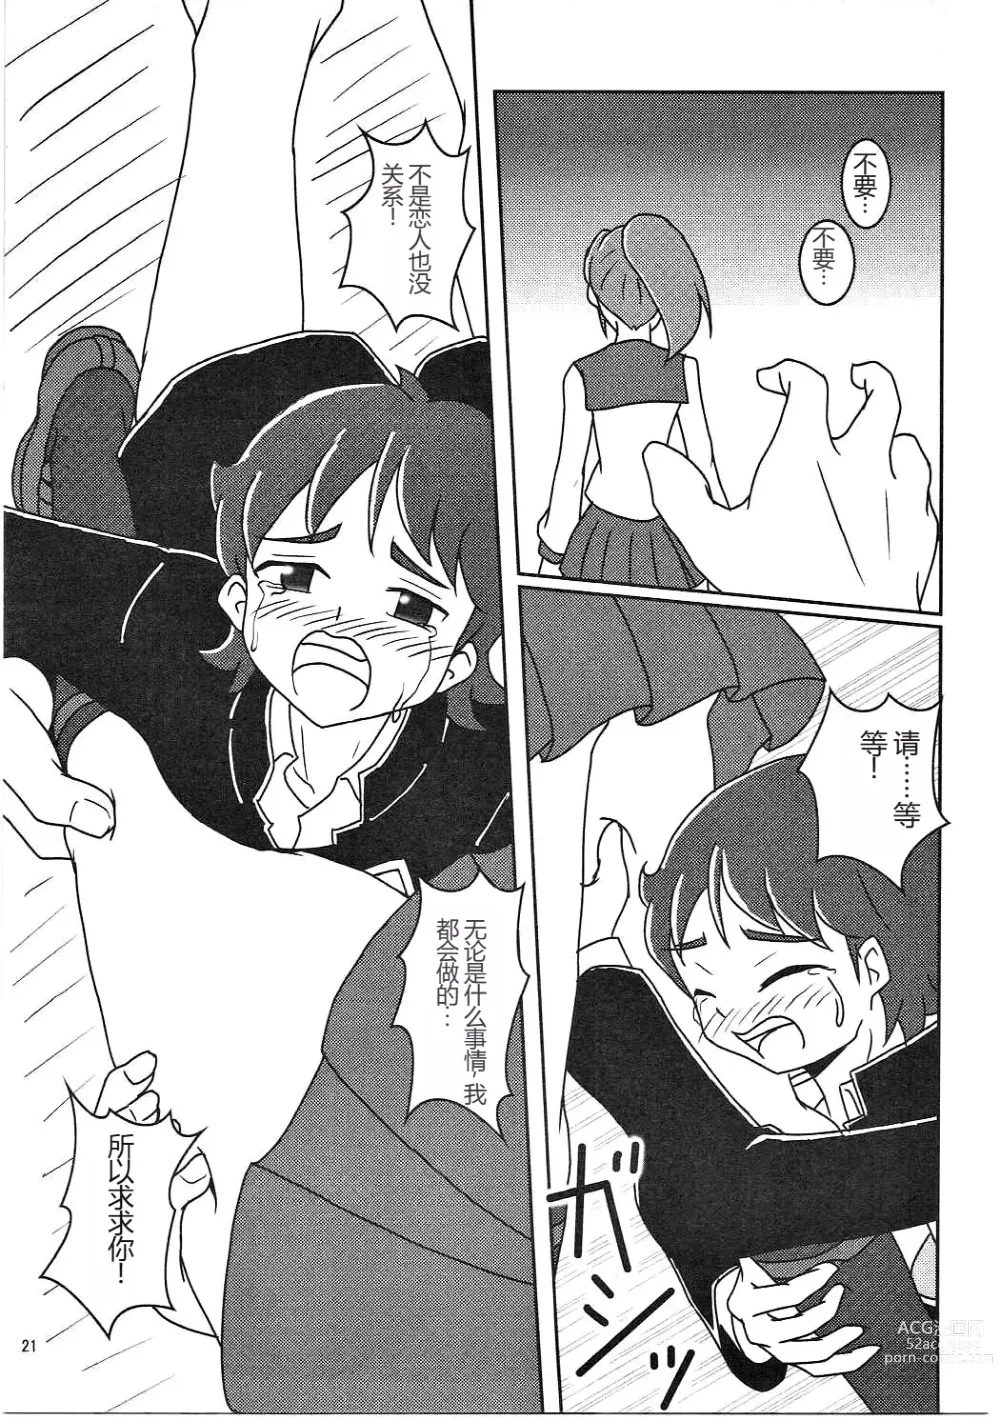 Page 22 of doujinshi HappinessCharge Zuricure!